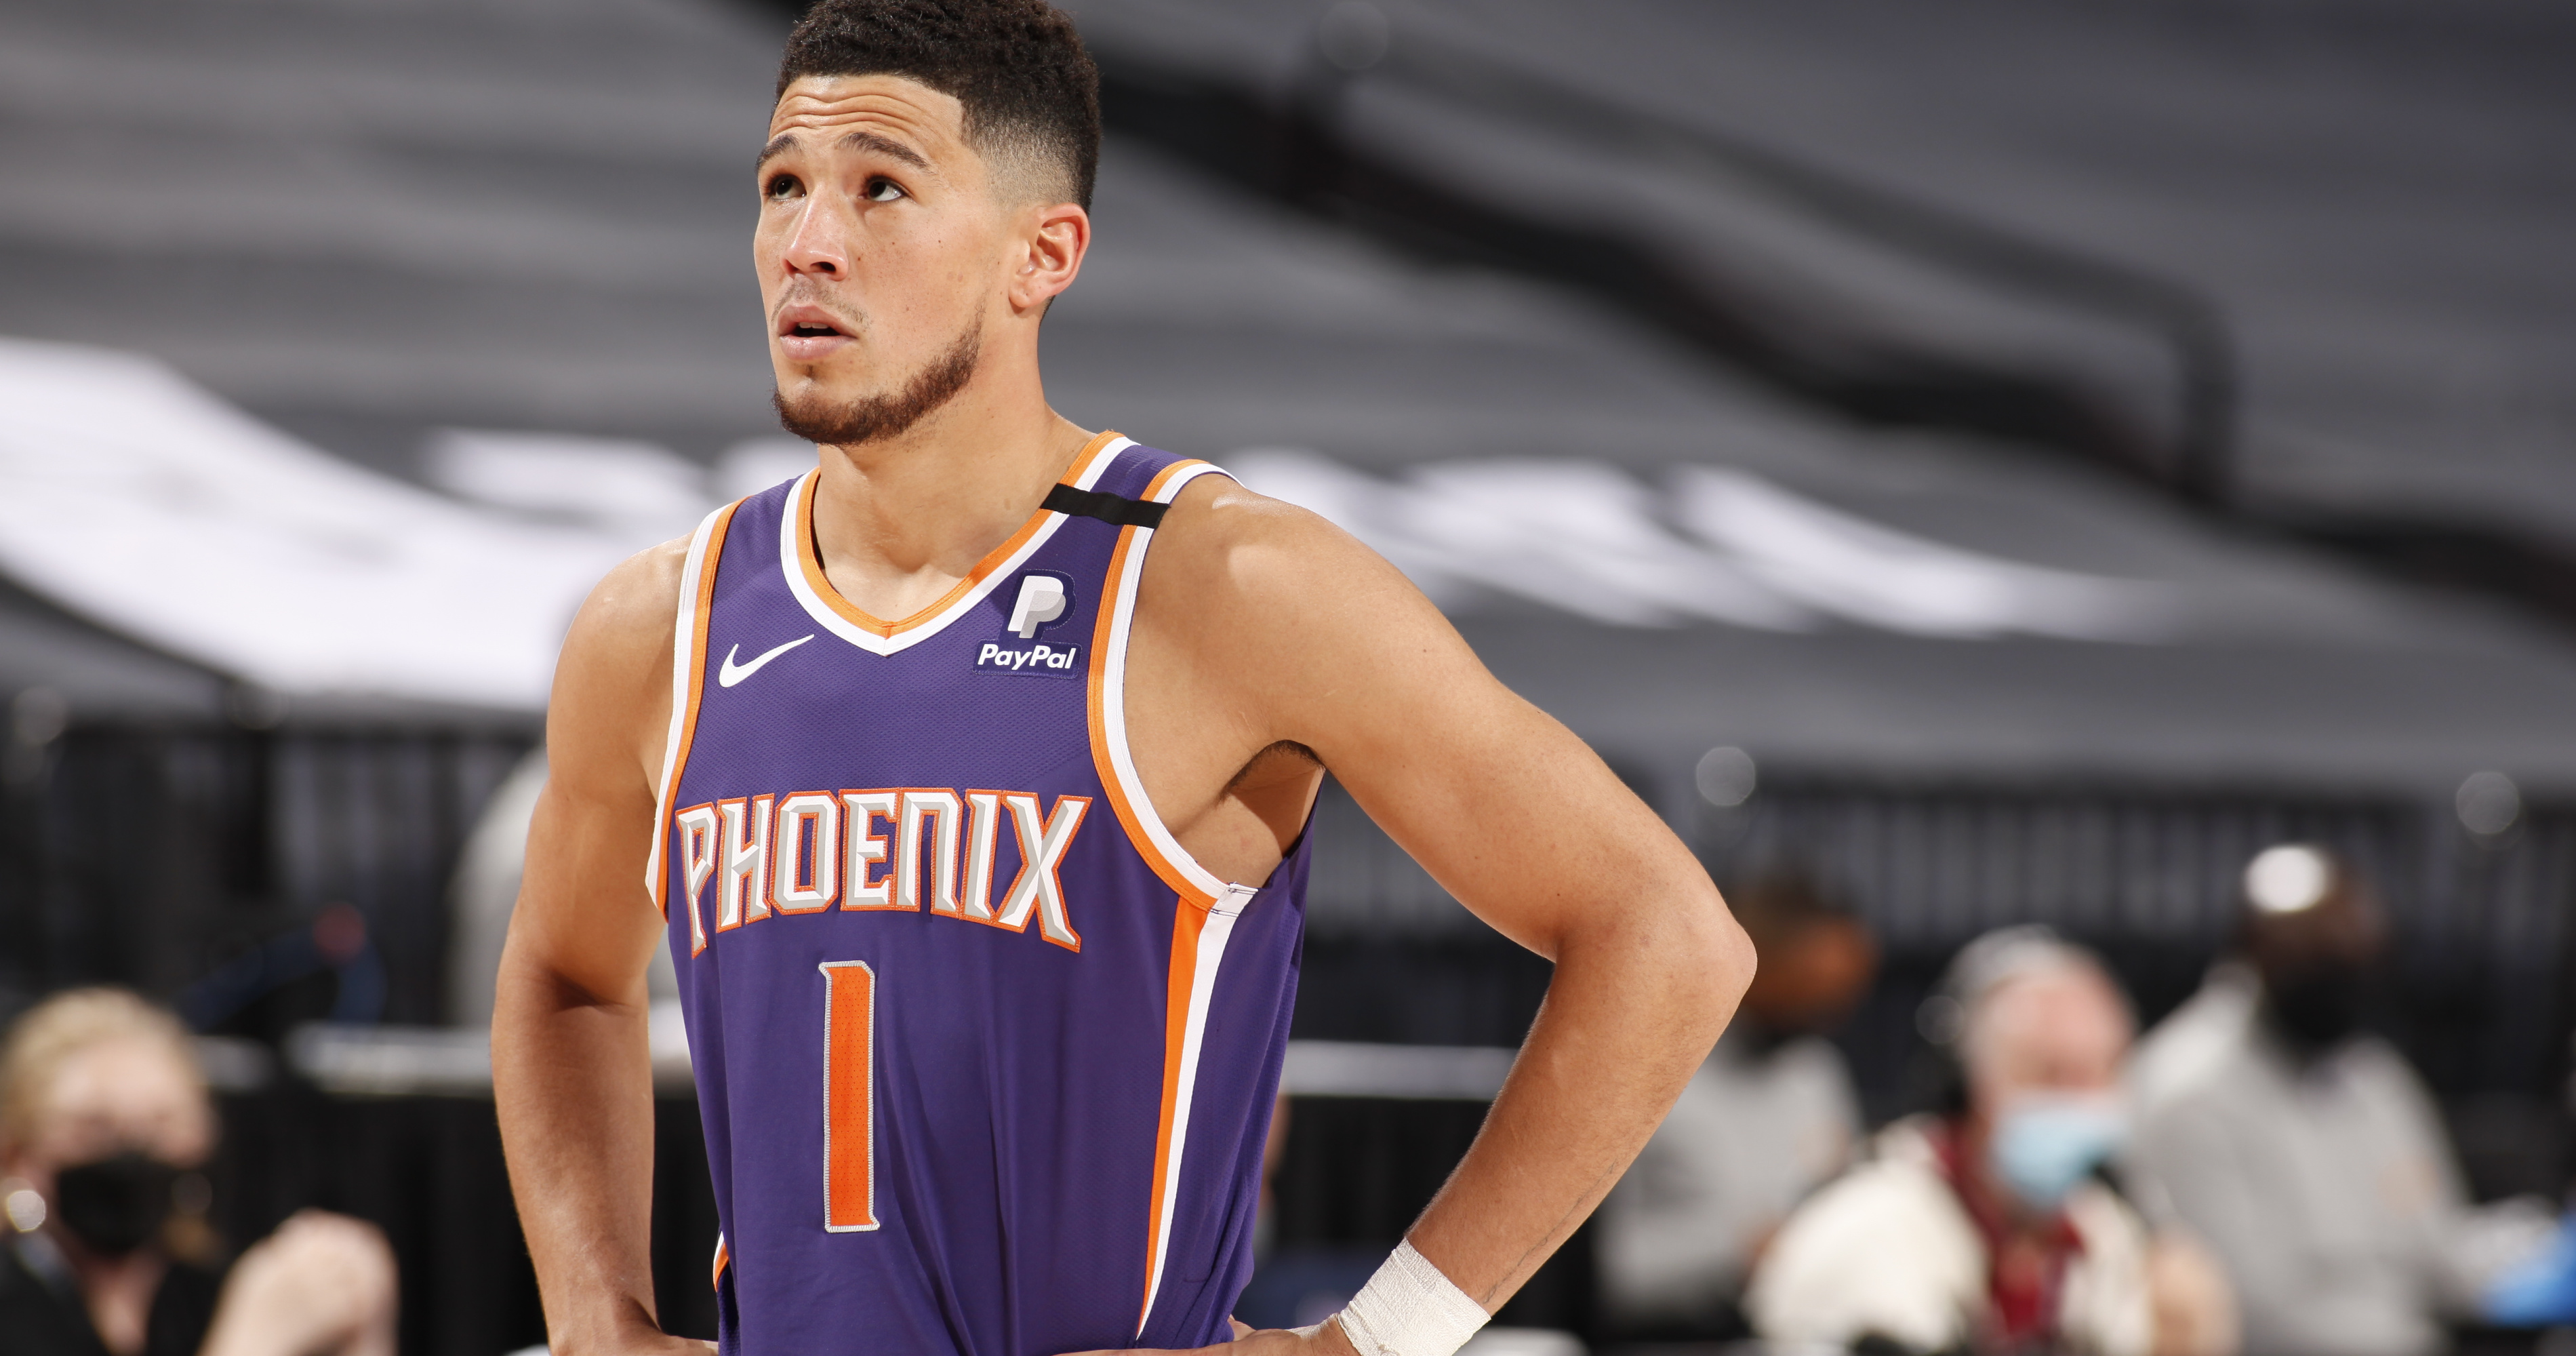 Kobe Bryant admits hating Suns, passes torch to Devin Booker